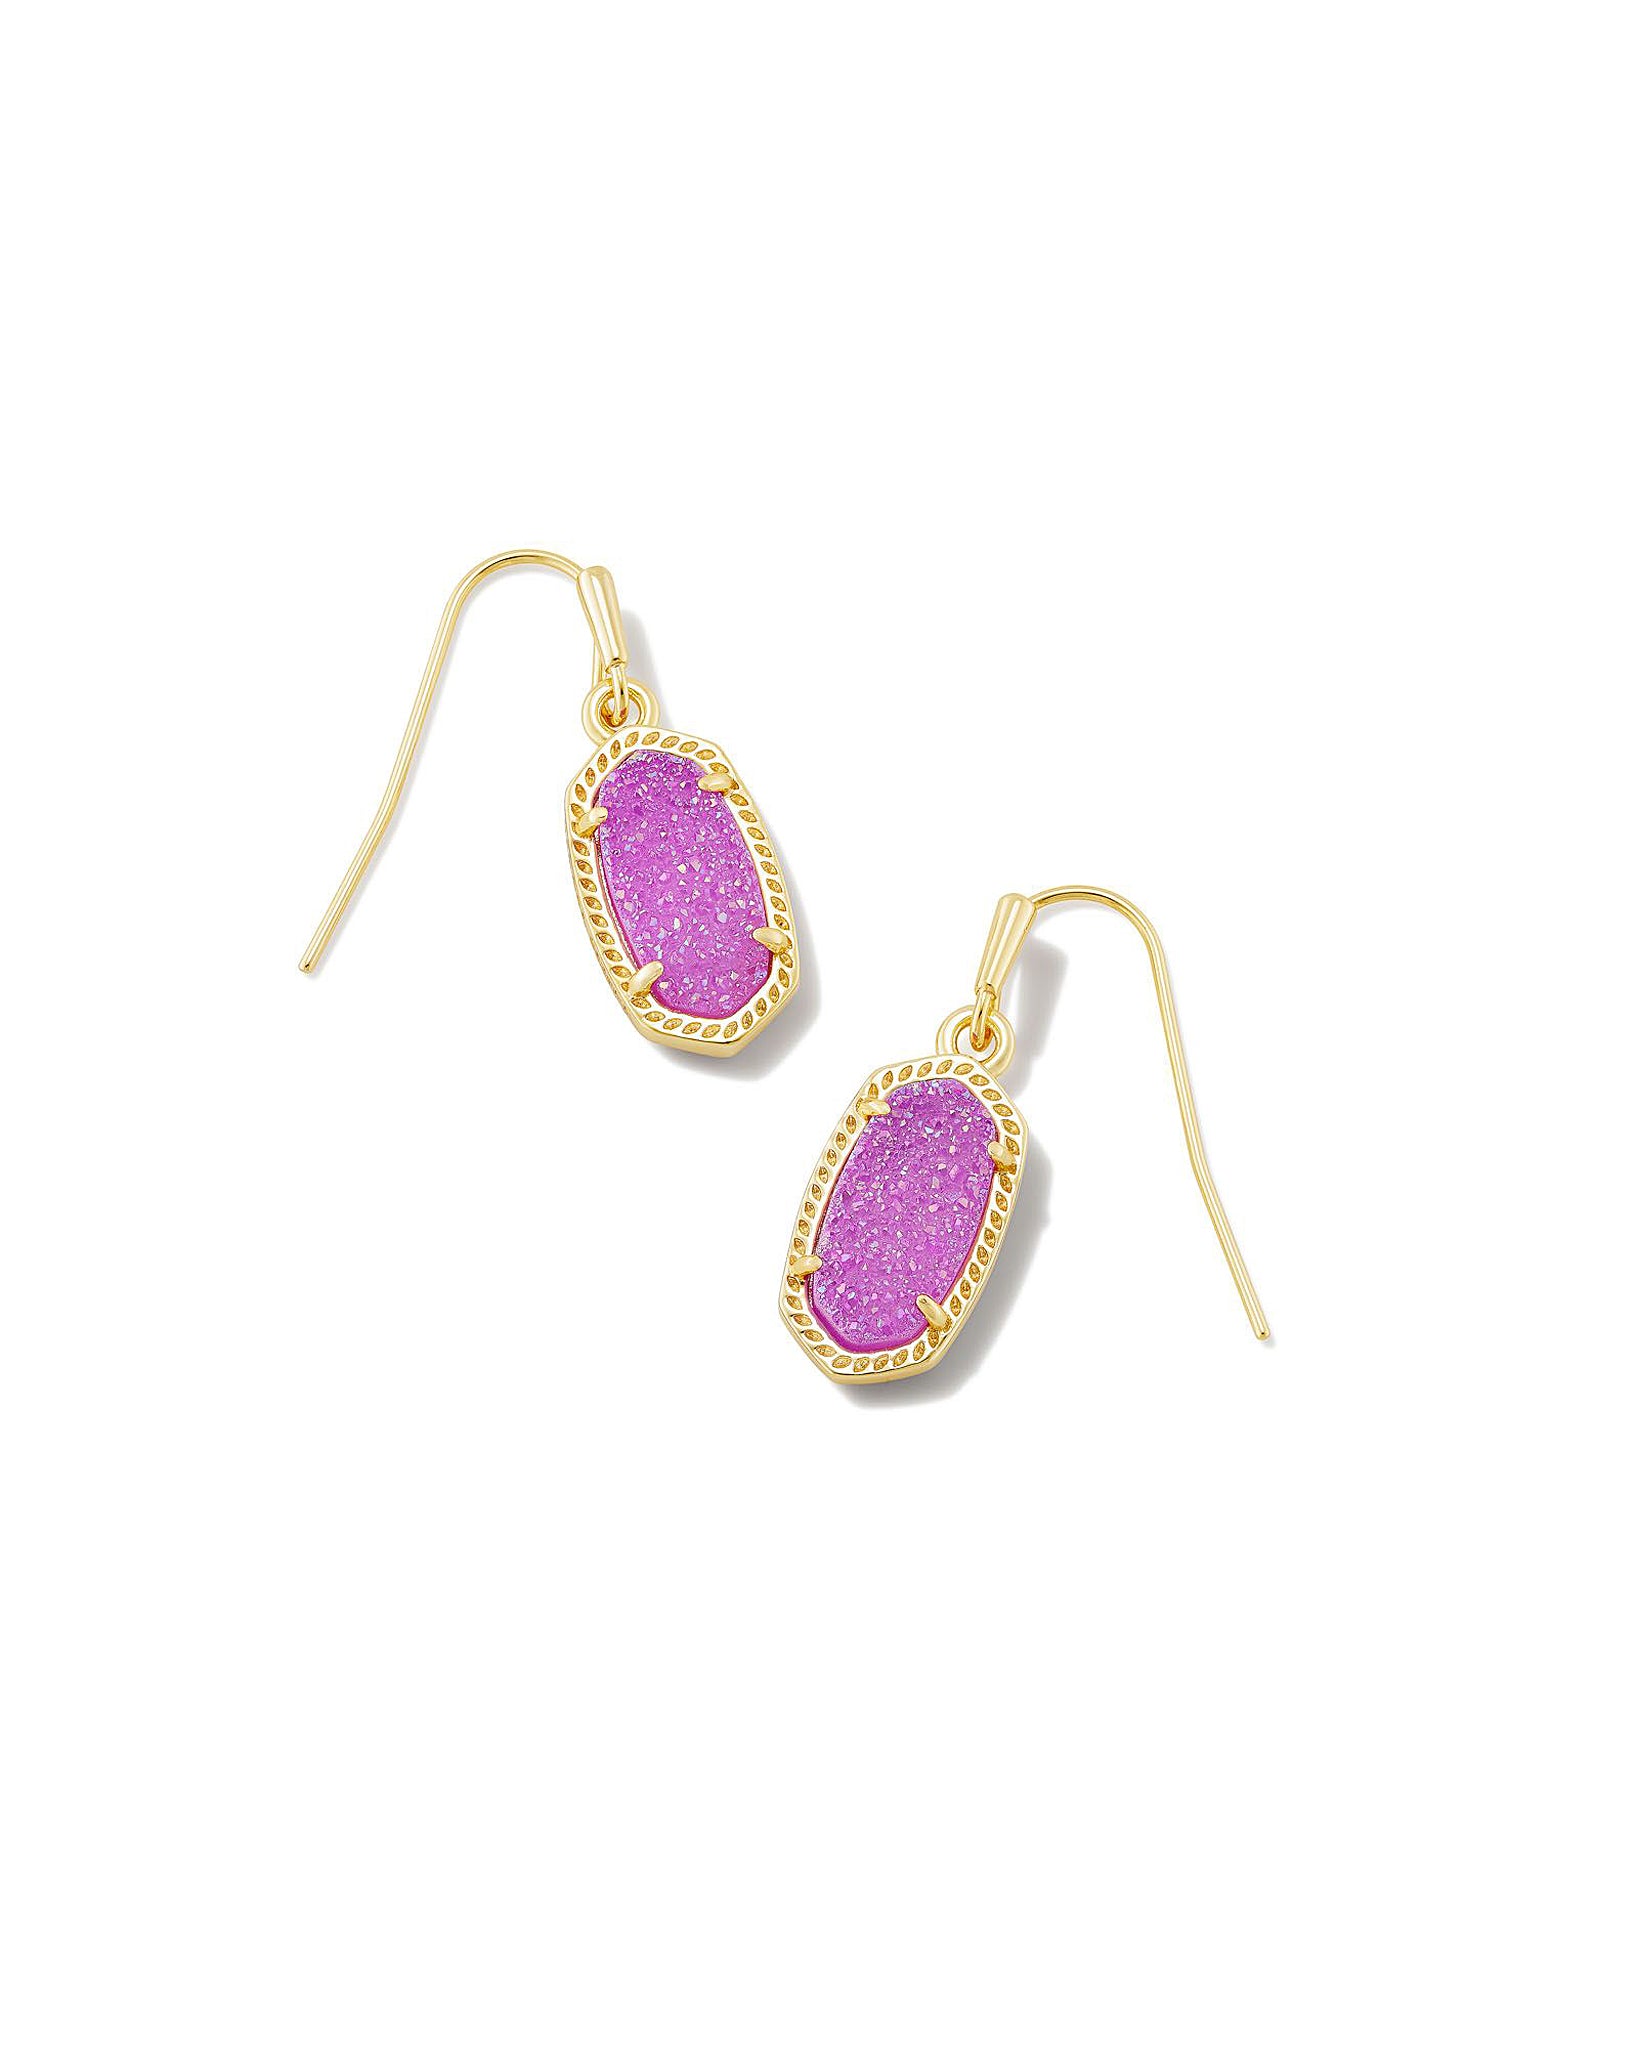 Kendra Scott Lee Oval Dangle Earrings in Light Mulberry Drusy and Gold